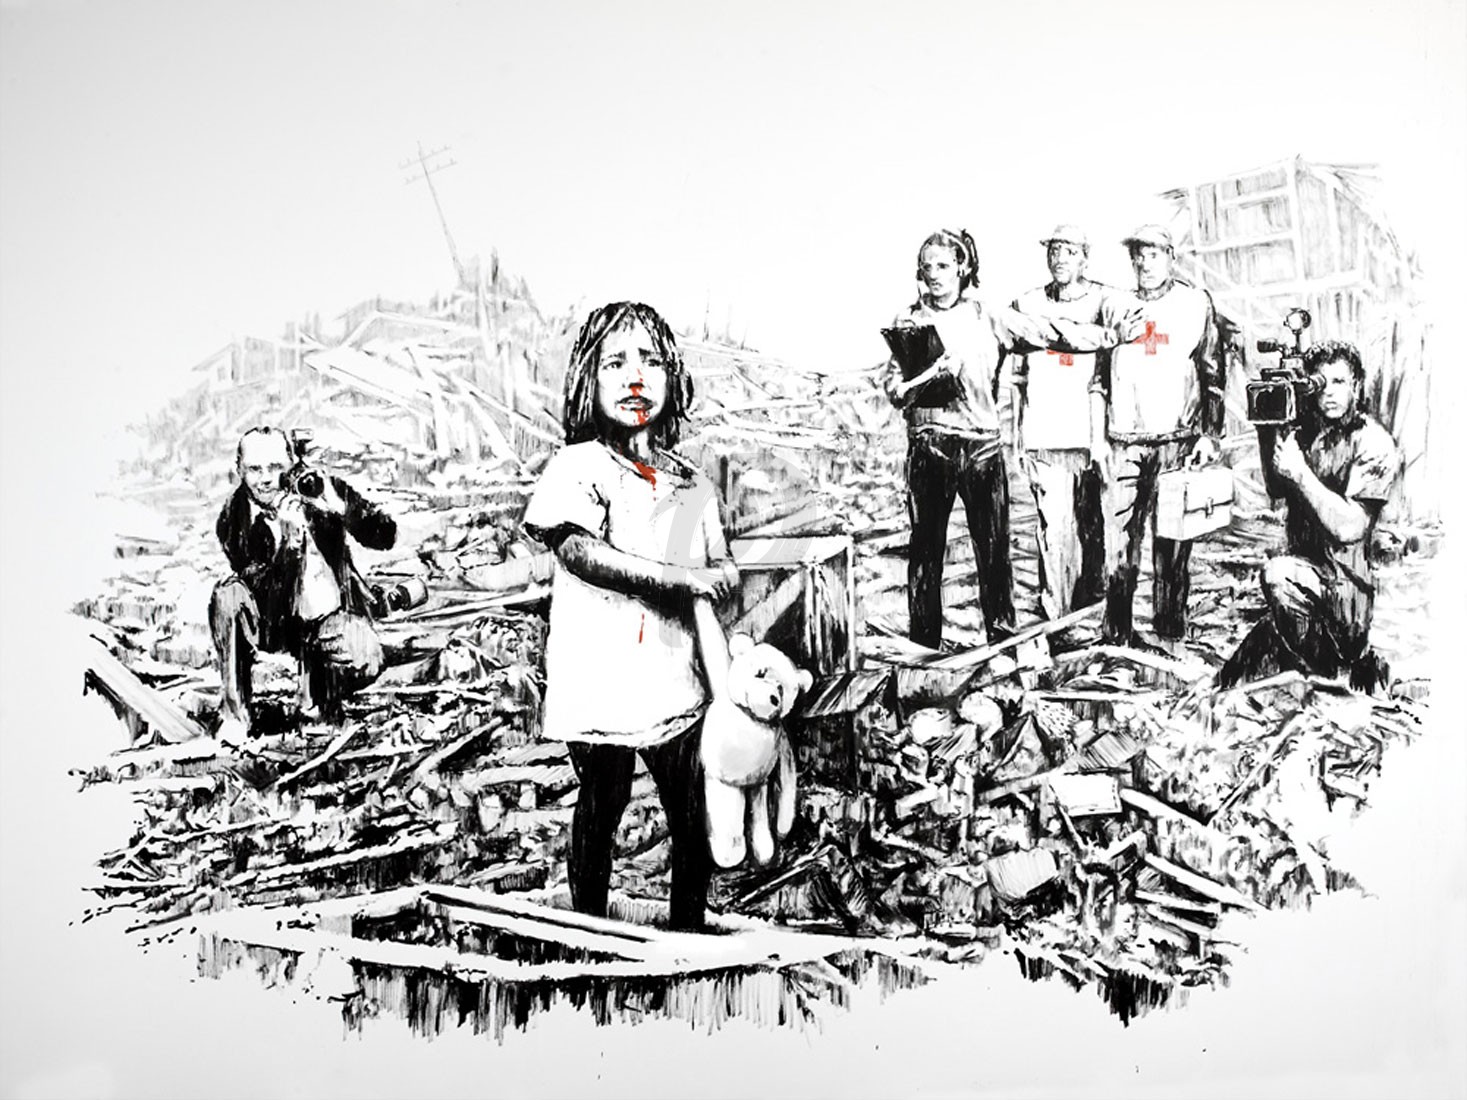 Banksy - Child Survivor Media (Hand-Painted Reproduction)